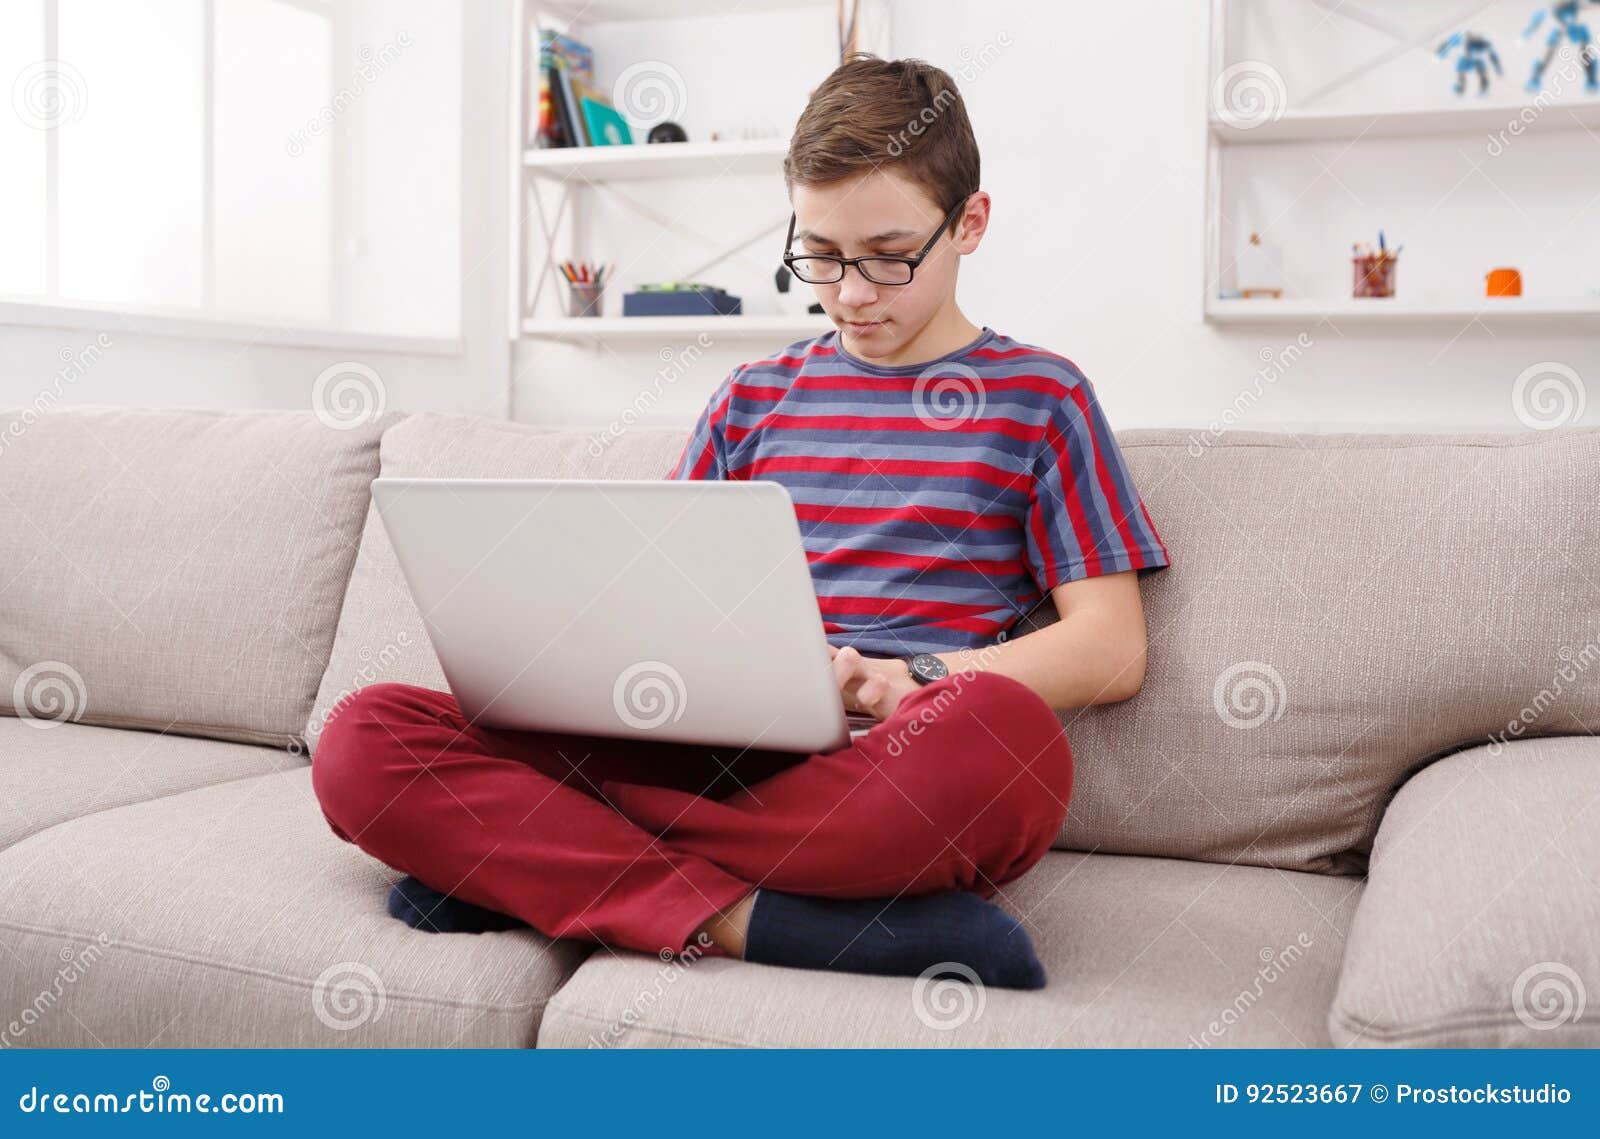 Candid teen on couch